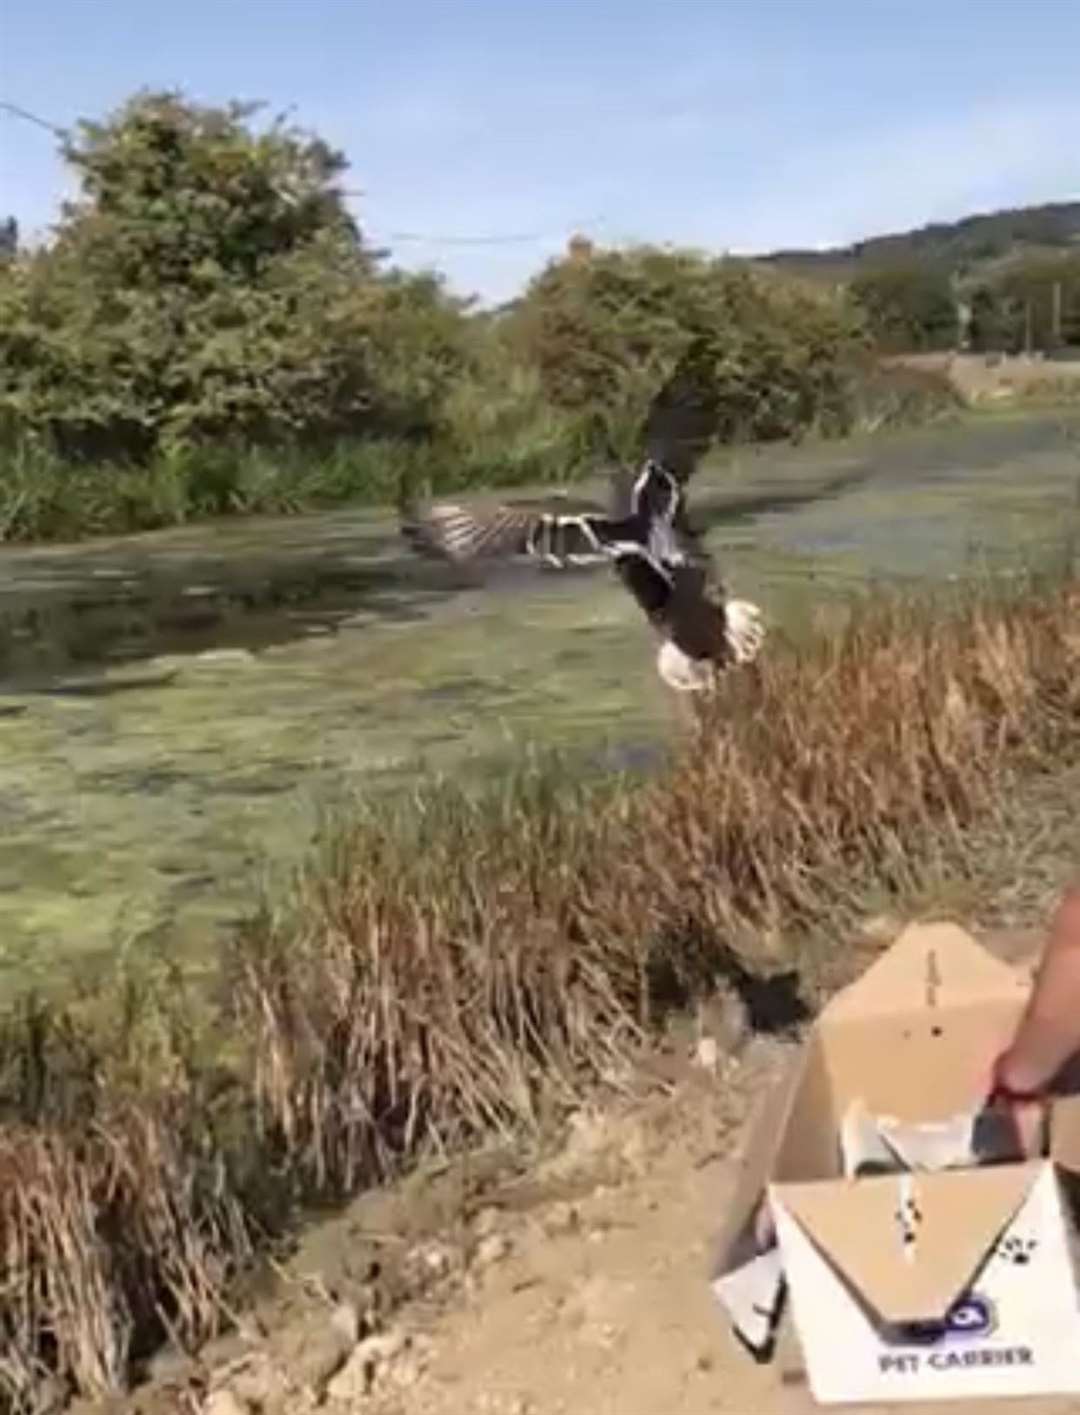 The mallard was eventually released back into the wild